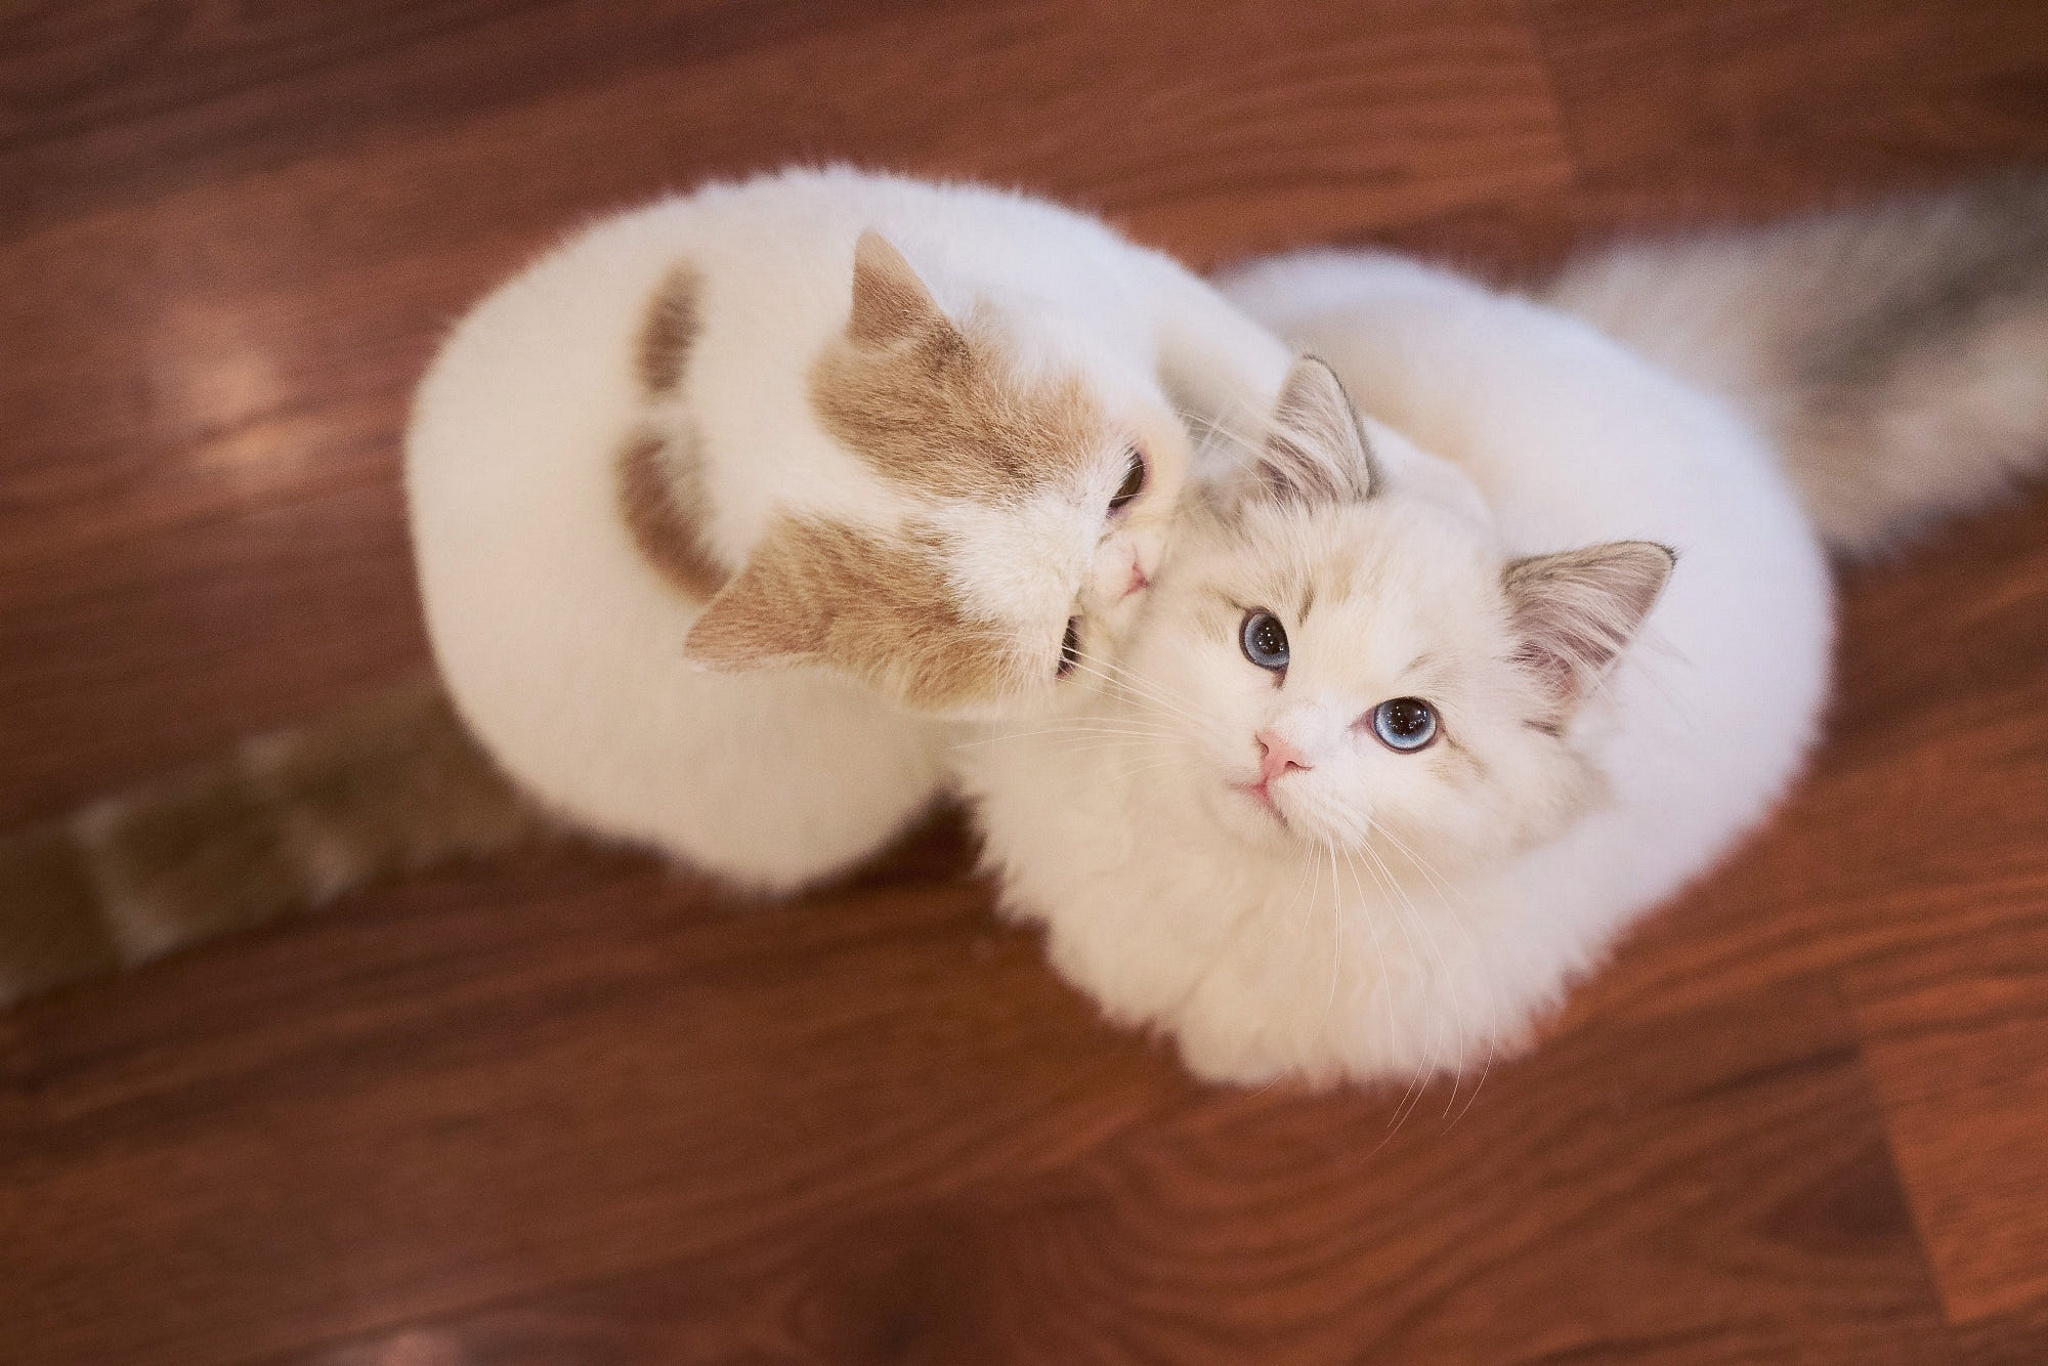 Two cute fluffy cats